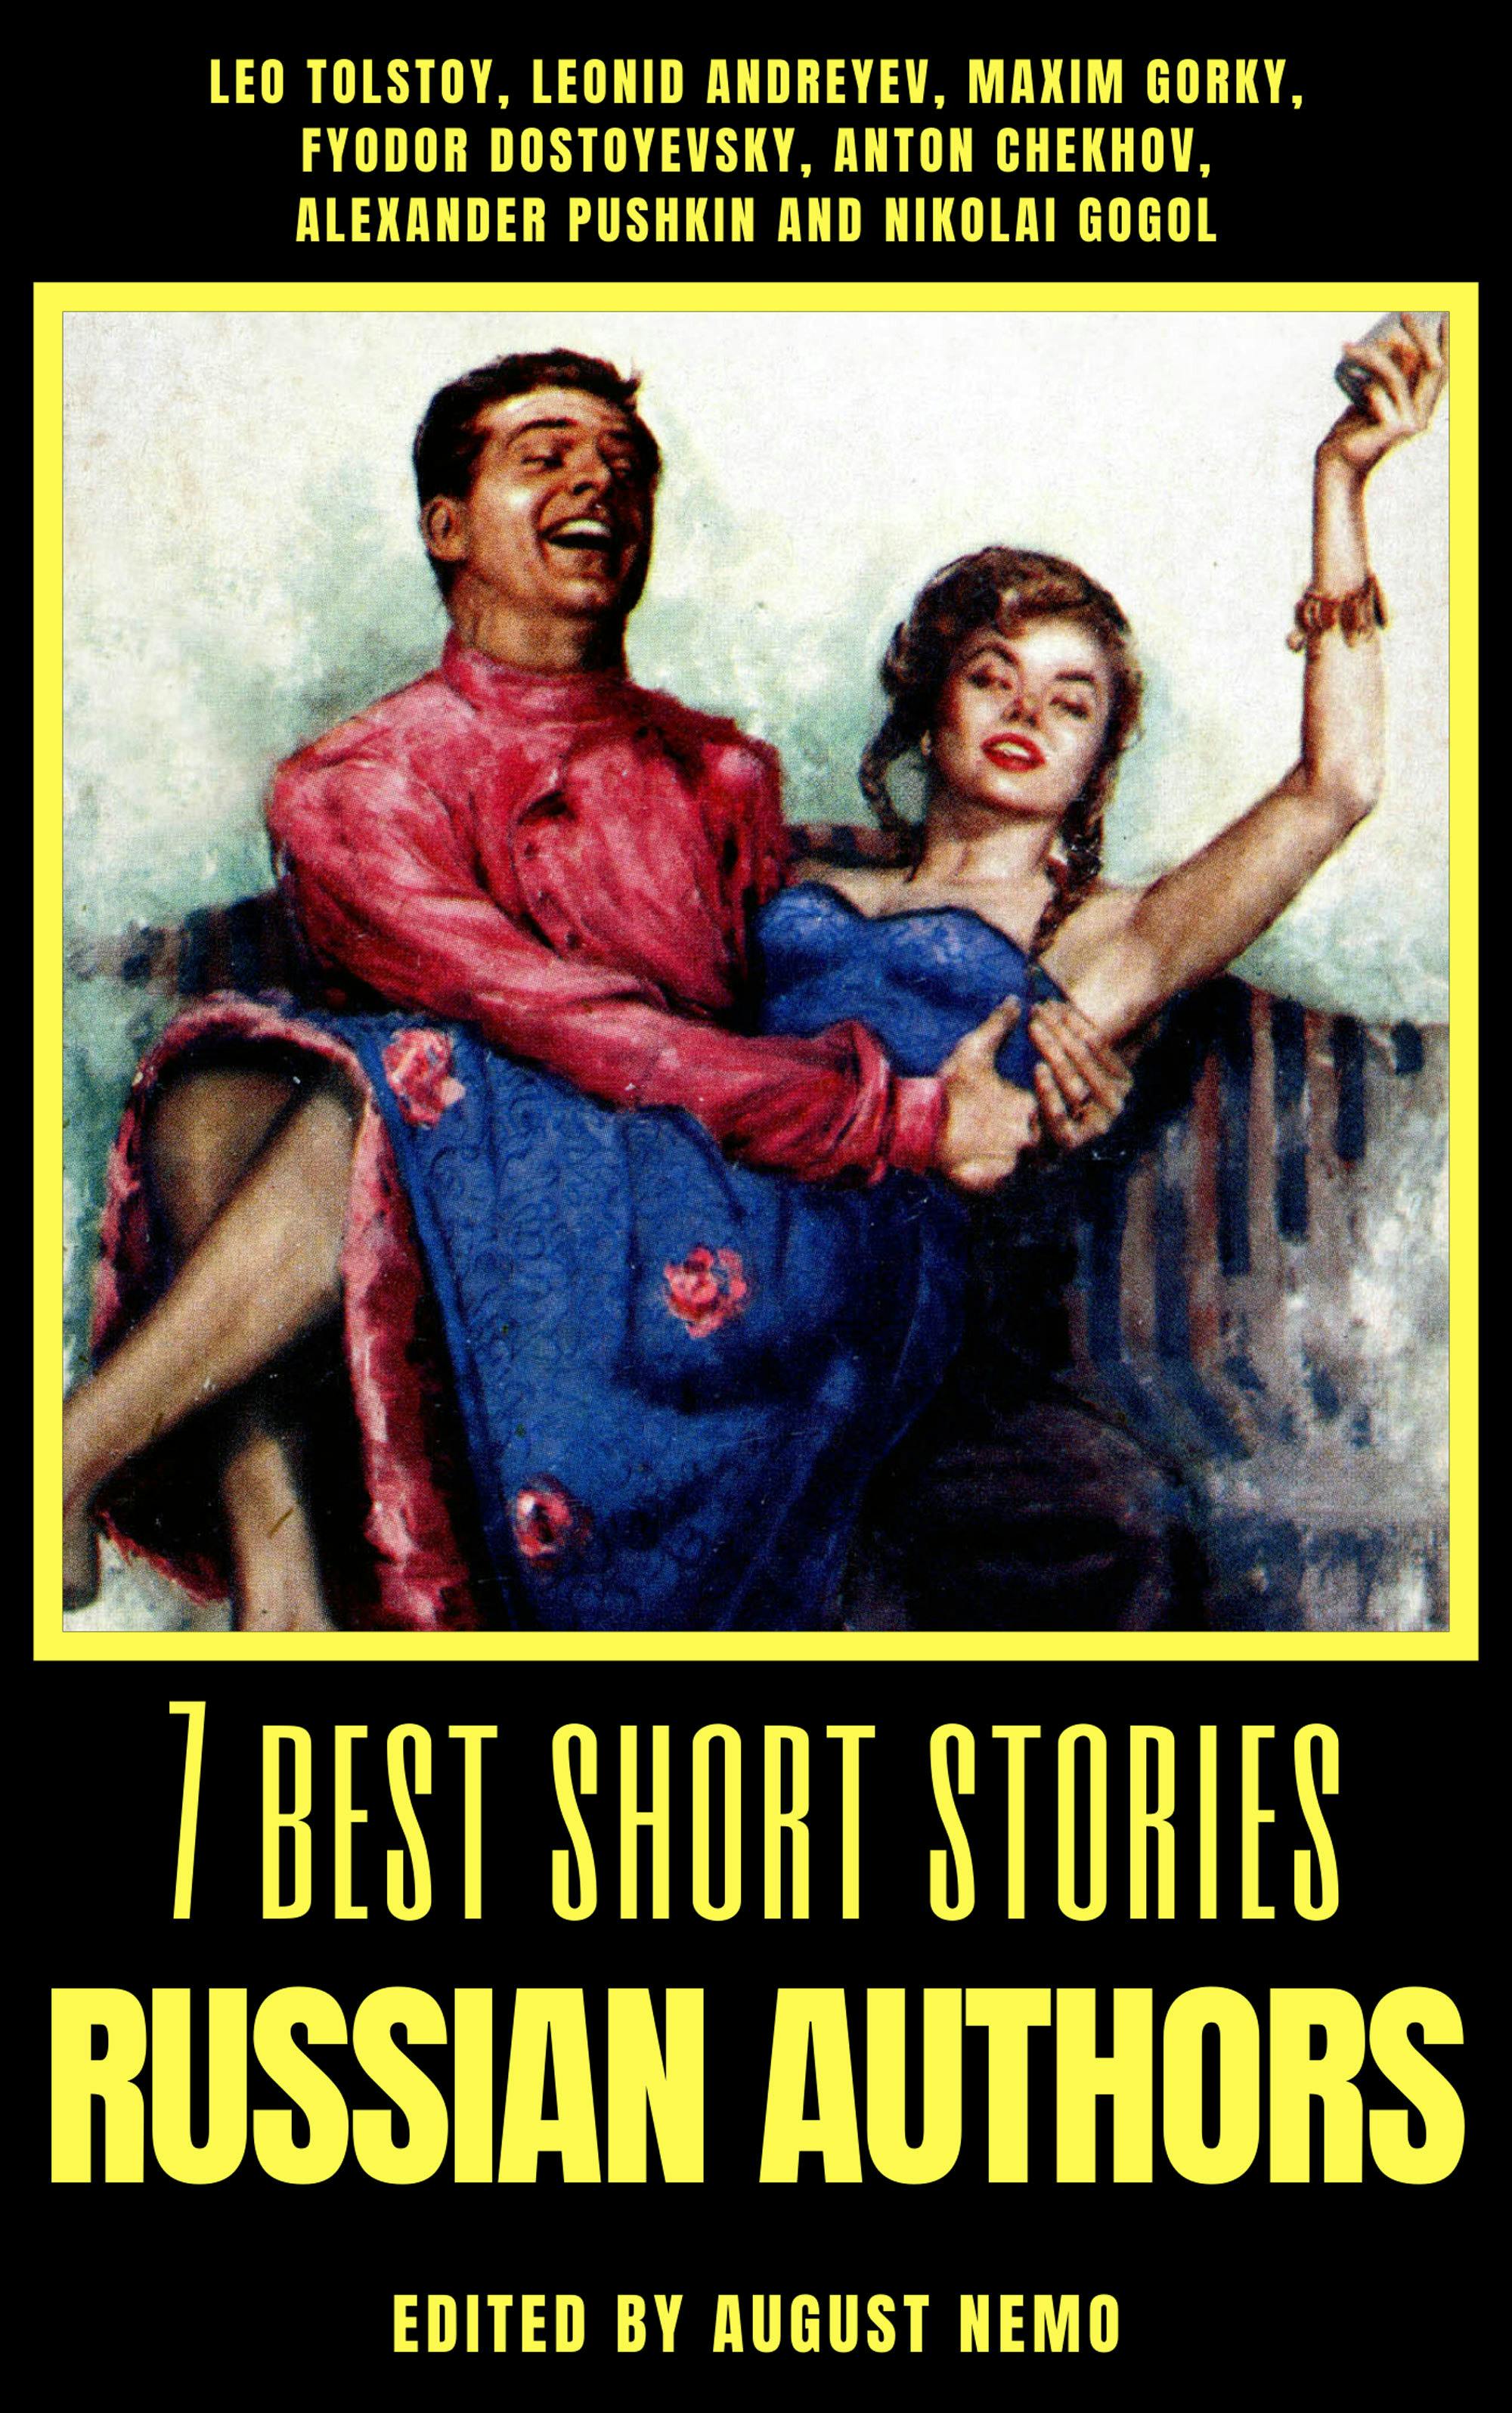 7 best short stories - Russian Authors - undefined